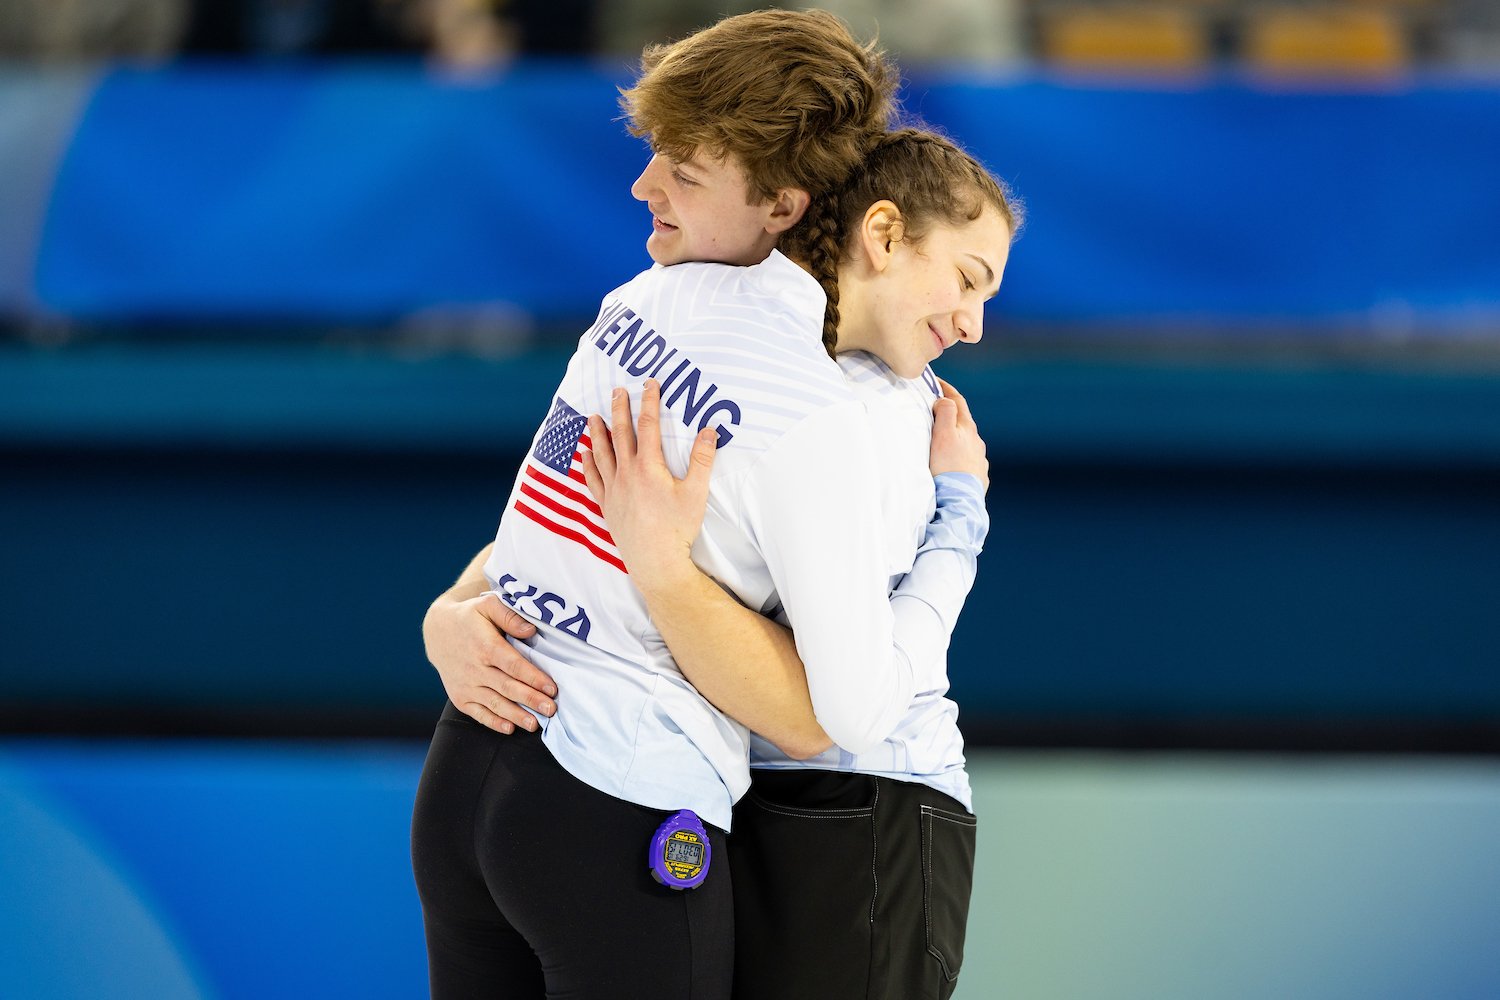 02 01 24 _ Day 13 _ Mixed Doubles36431.jpg